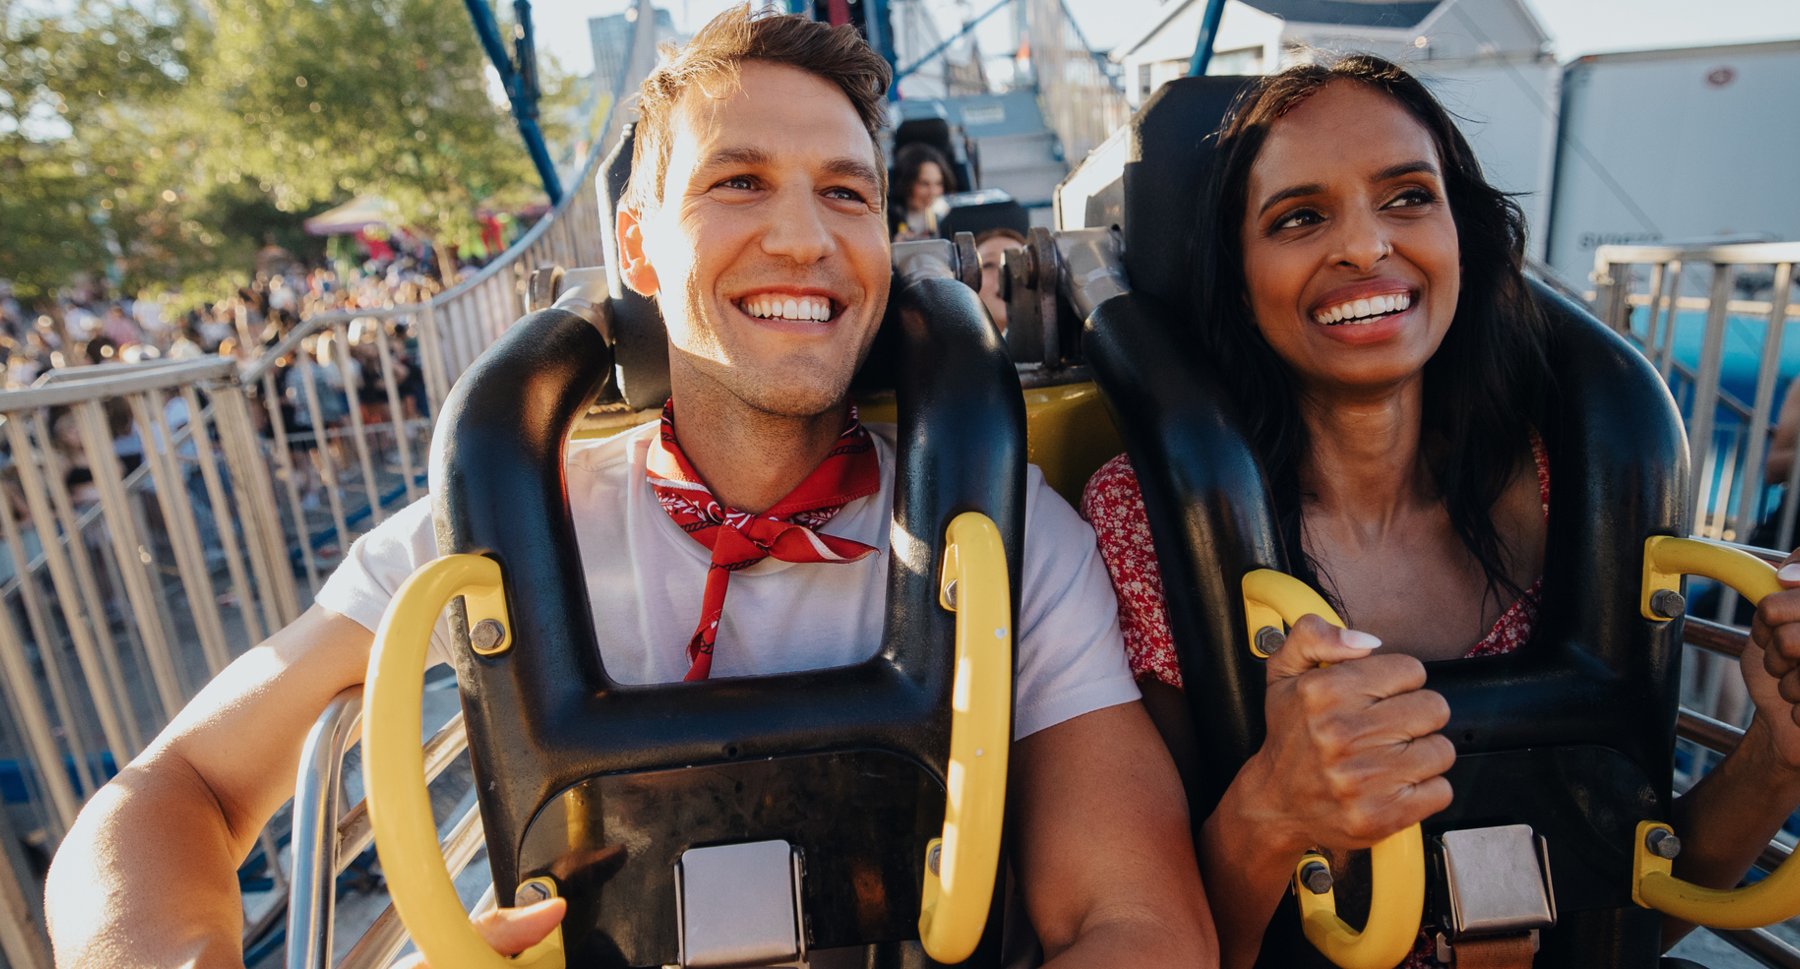 A man and women smiling while riding an midway ride.